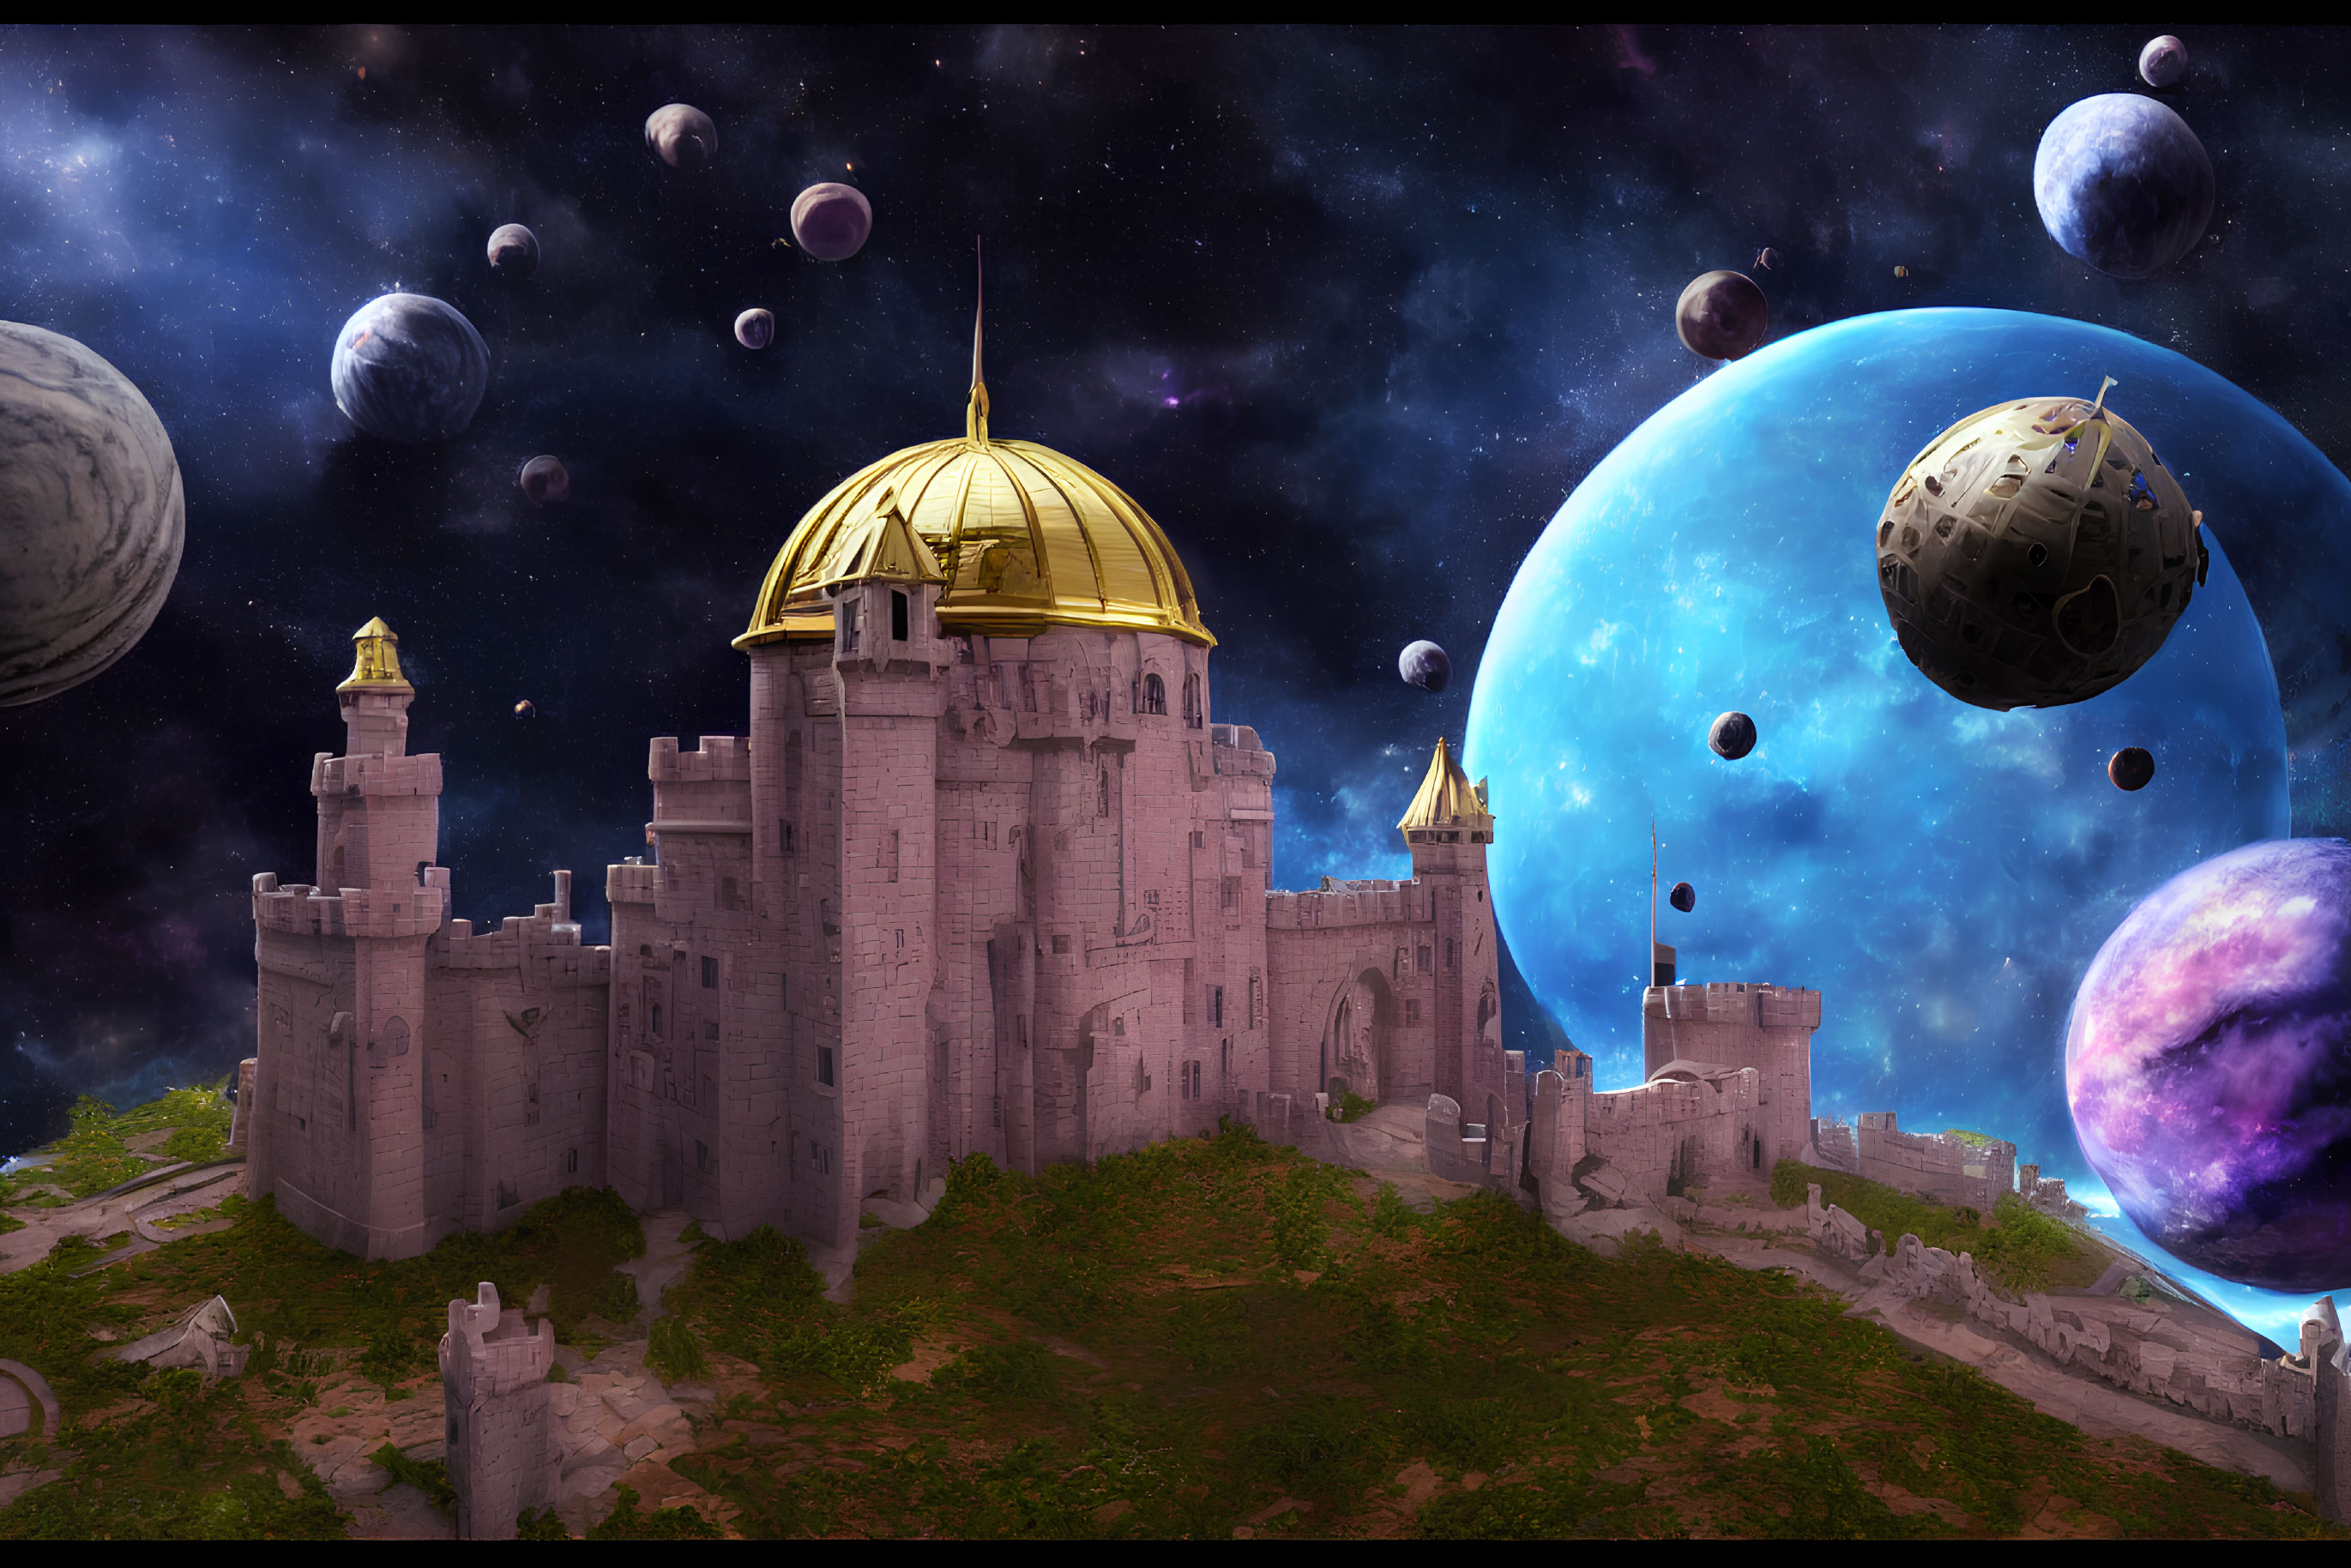 Majestic fantasy castle with golden domes under cosmic sky